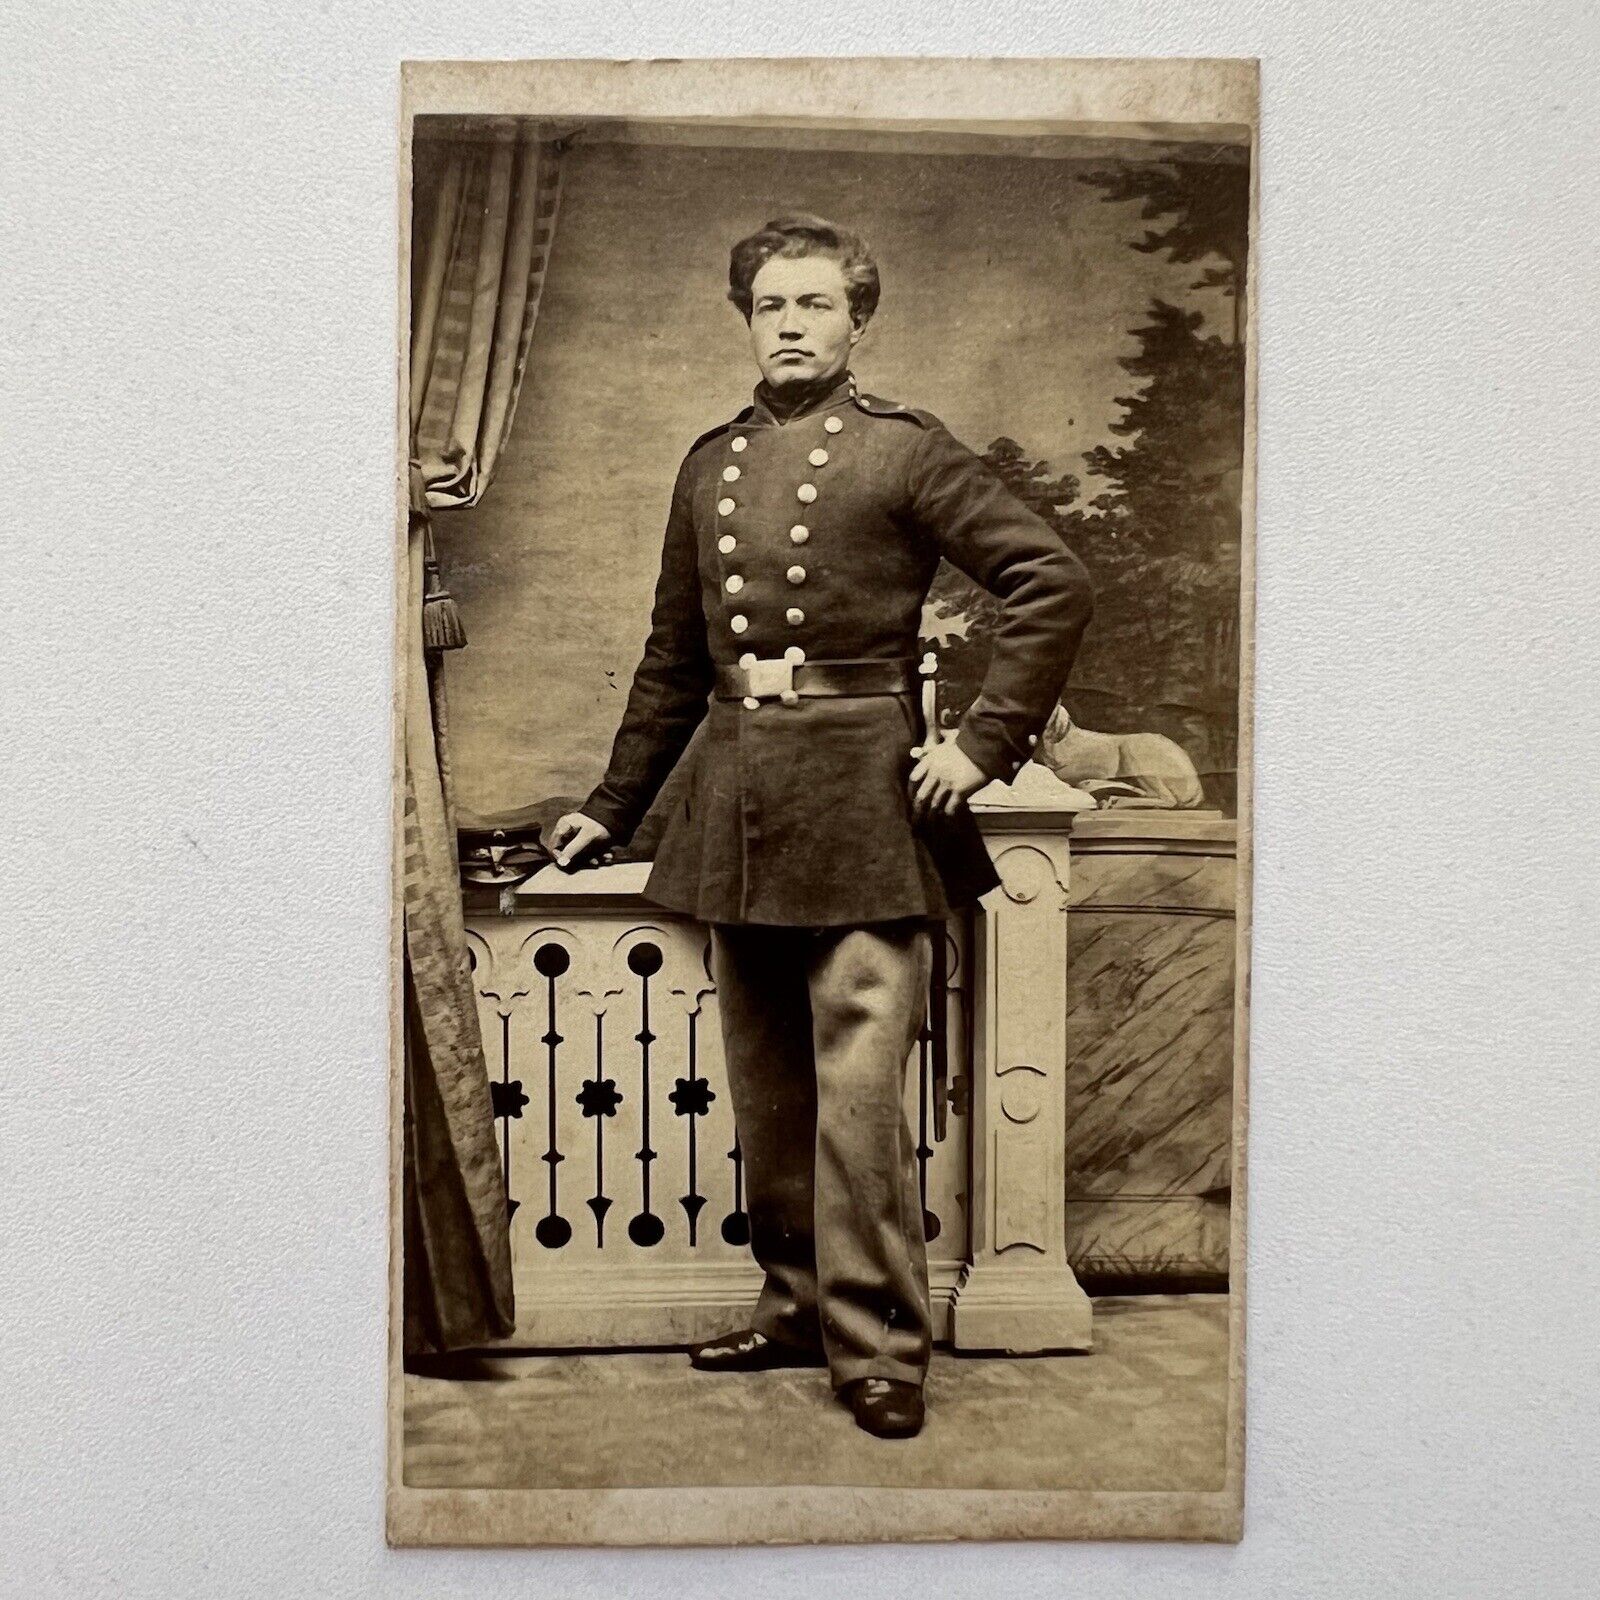 Antique CDV Photograph Very Handsome Young Man Military Soldier Sword Denmark?